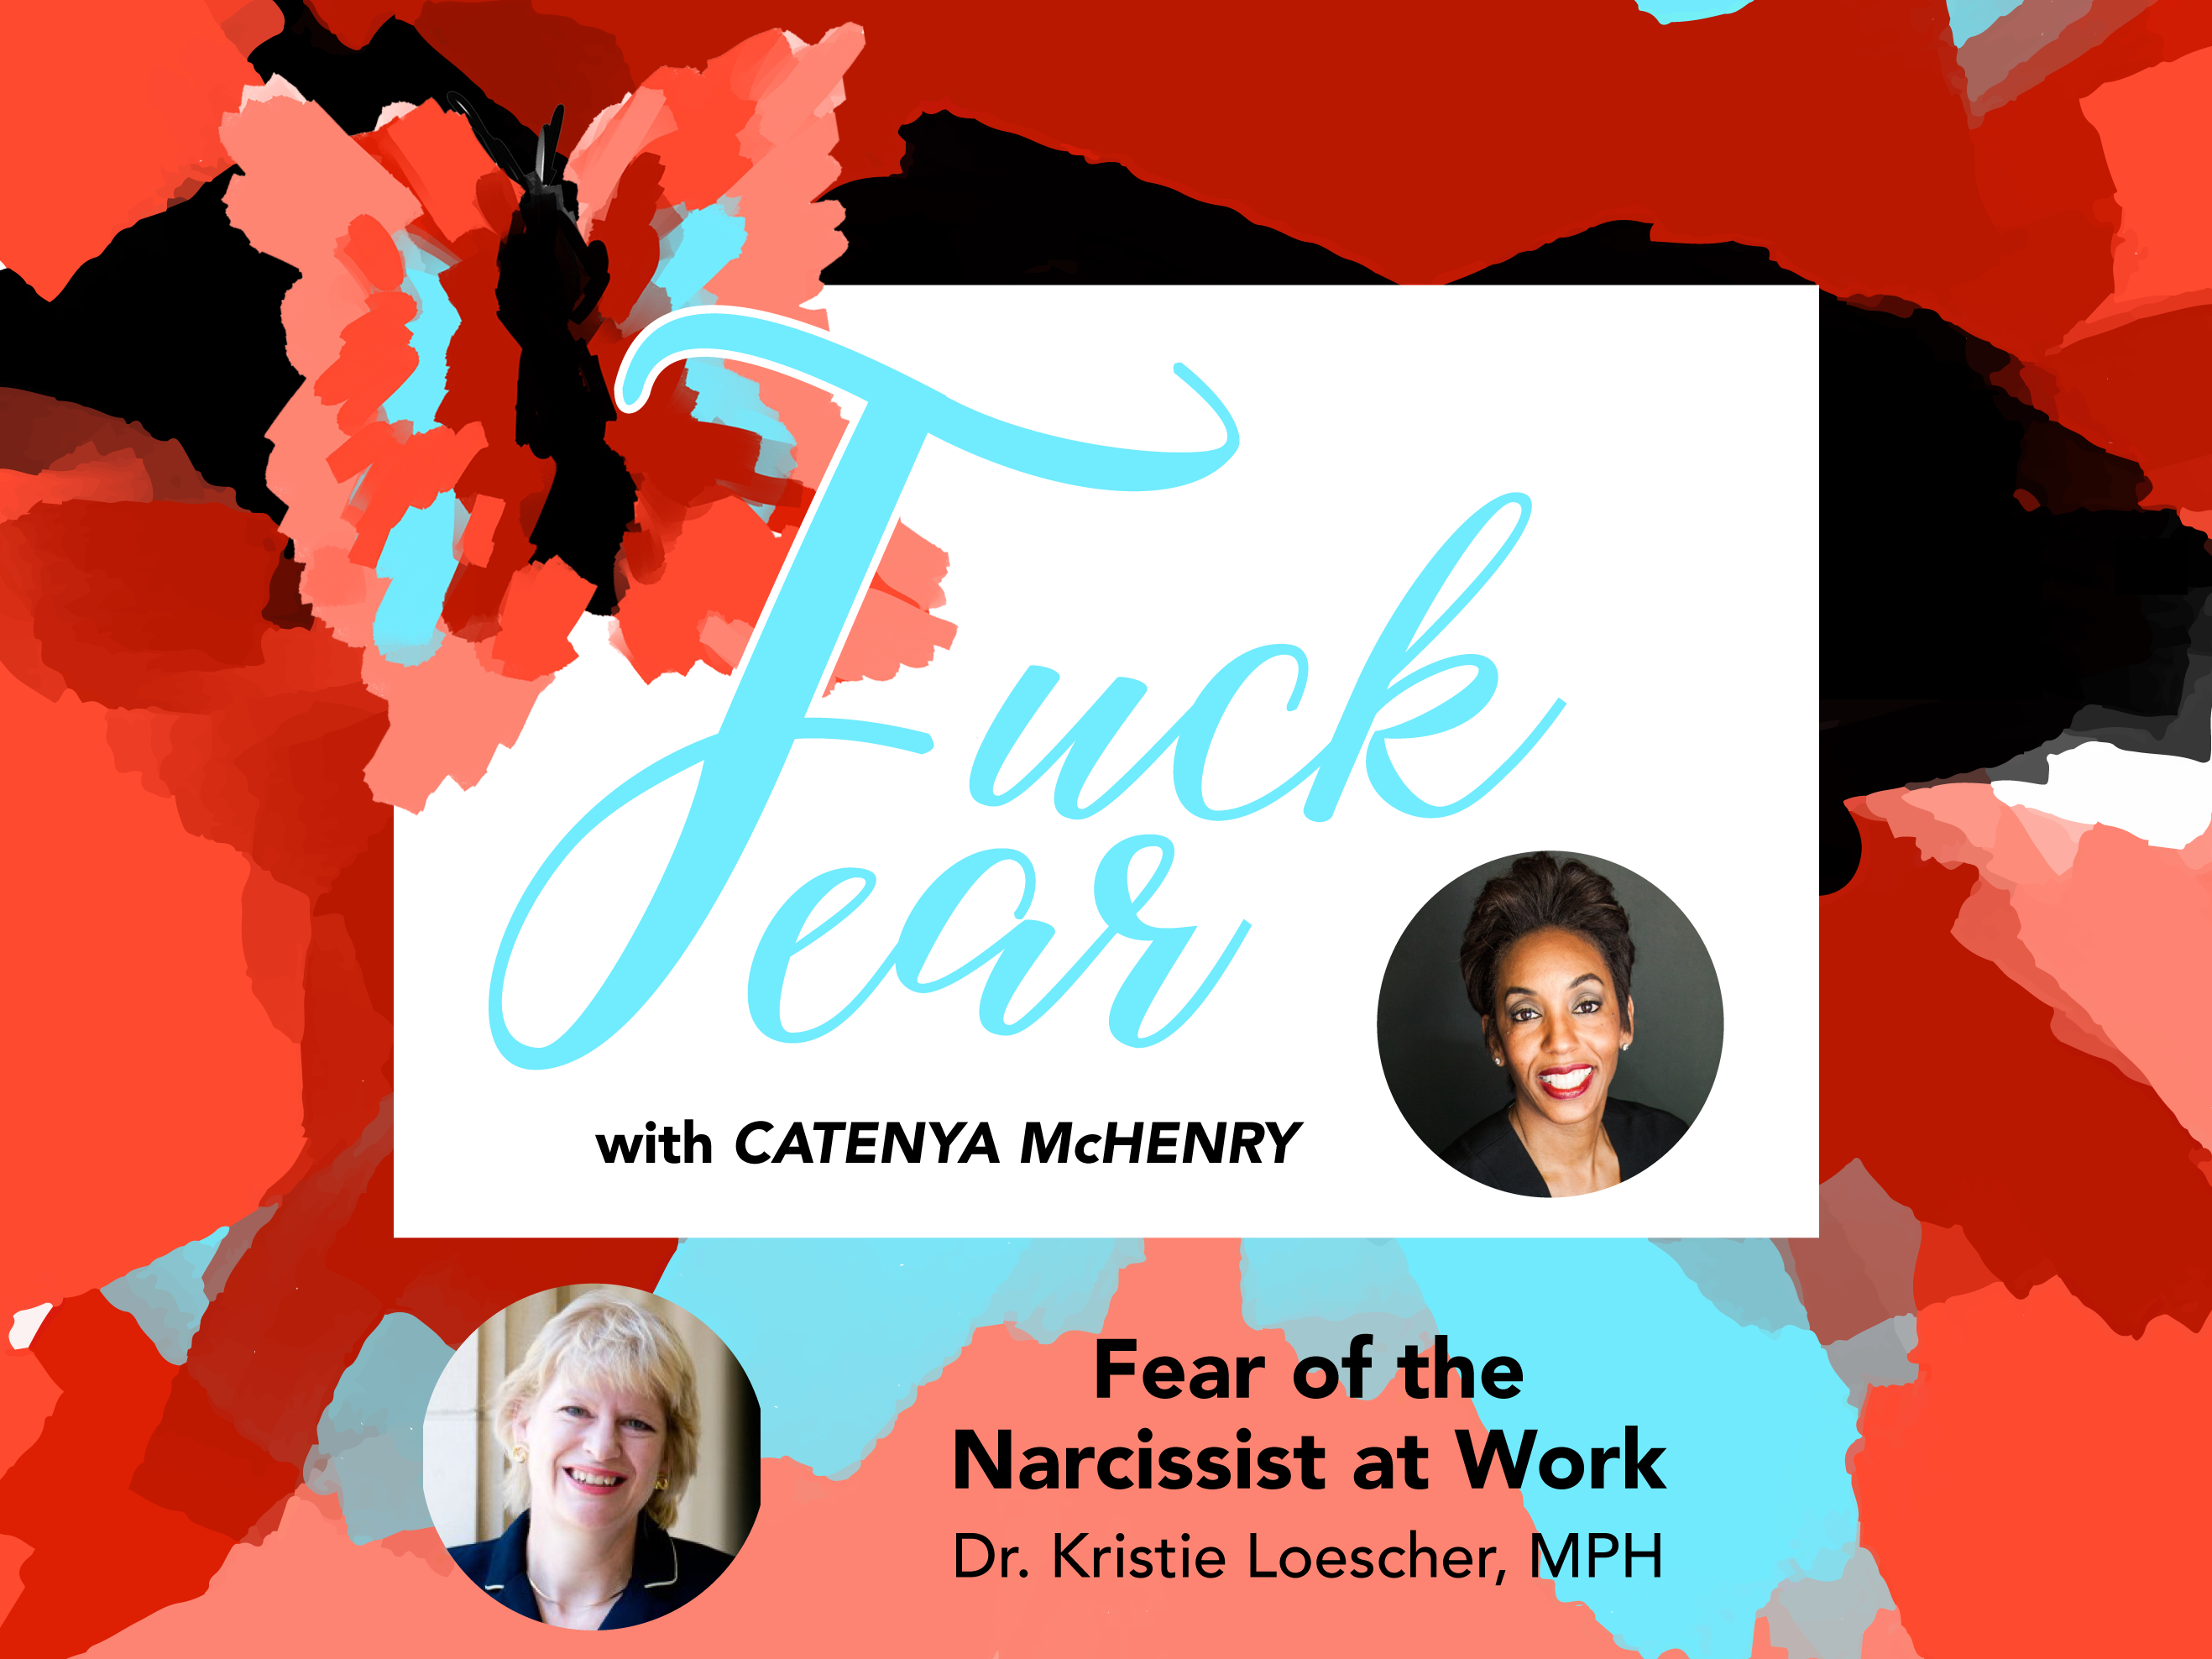 Fuck Fear podcast with Catenya McHenry, fear of the narcissist in the workplace is the topics she discusses with Dr. Kristie Loescher at the University of Texas at Austin. We discuss why narcissists are constantly promoted, how to recognize their grandiose personality type and how to separate yourself from the abuse.